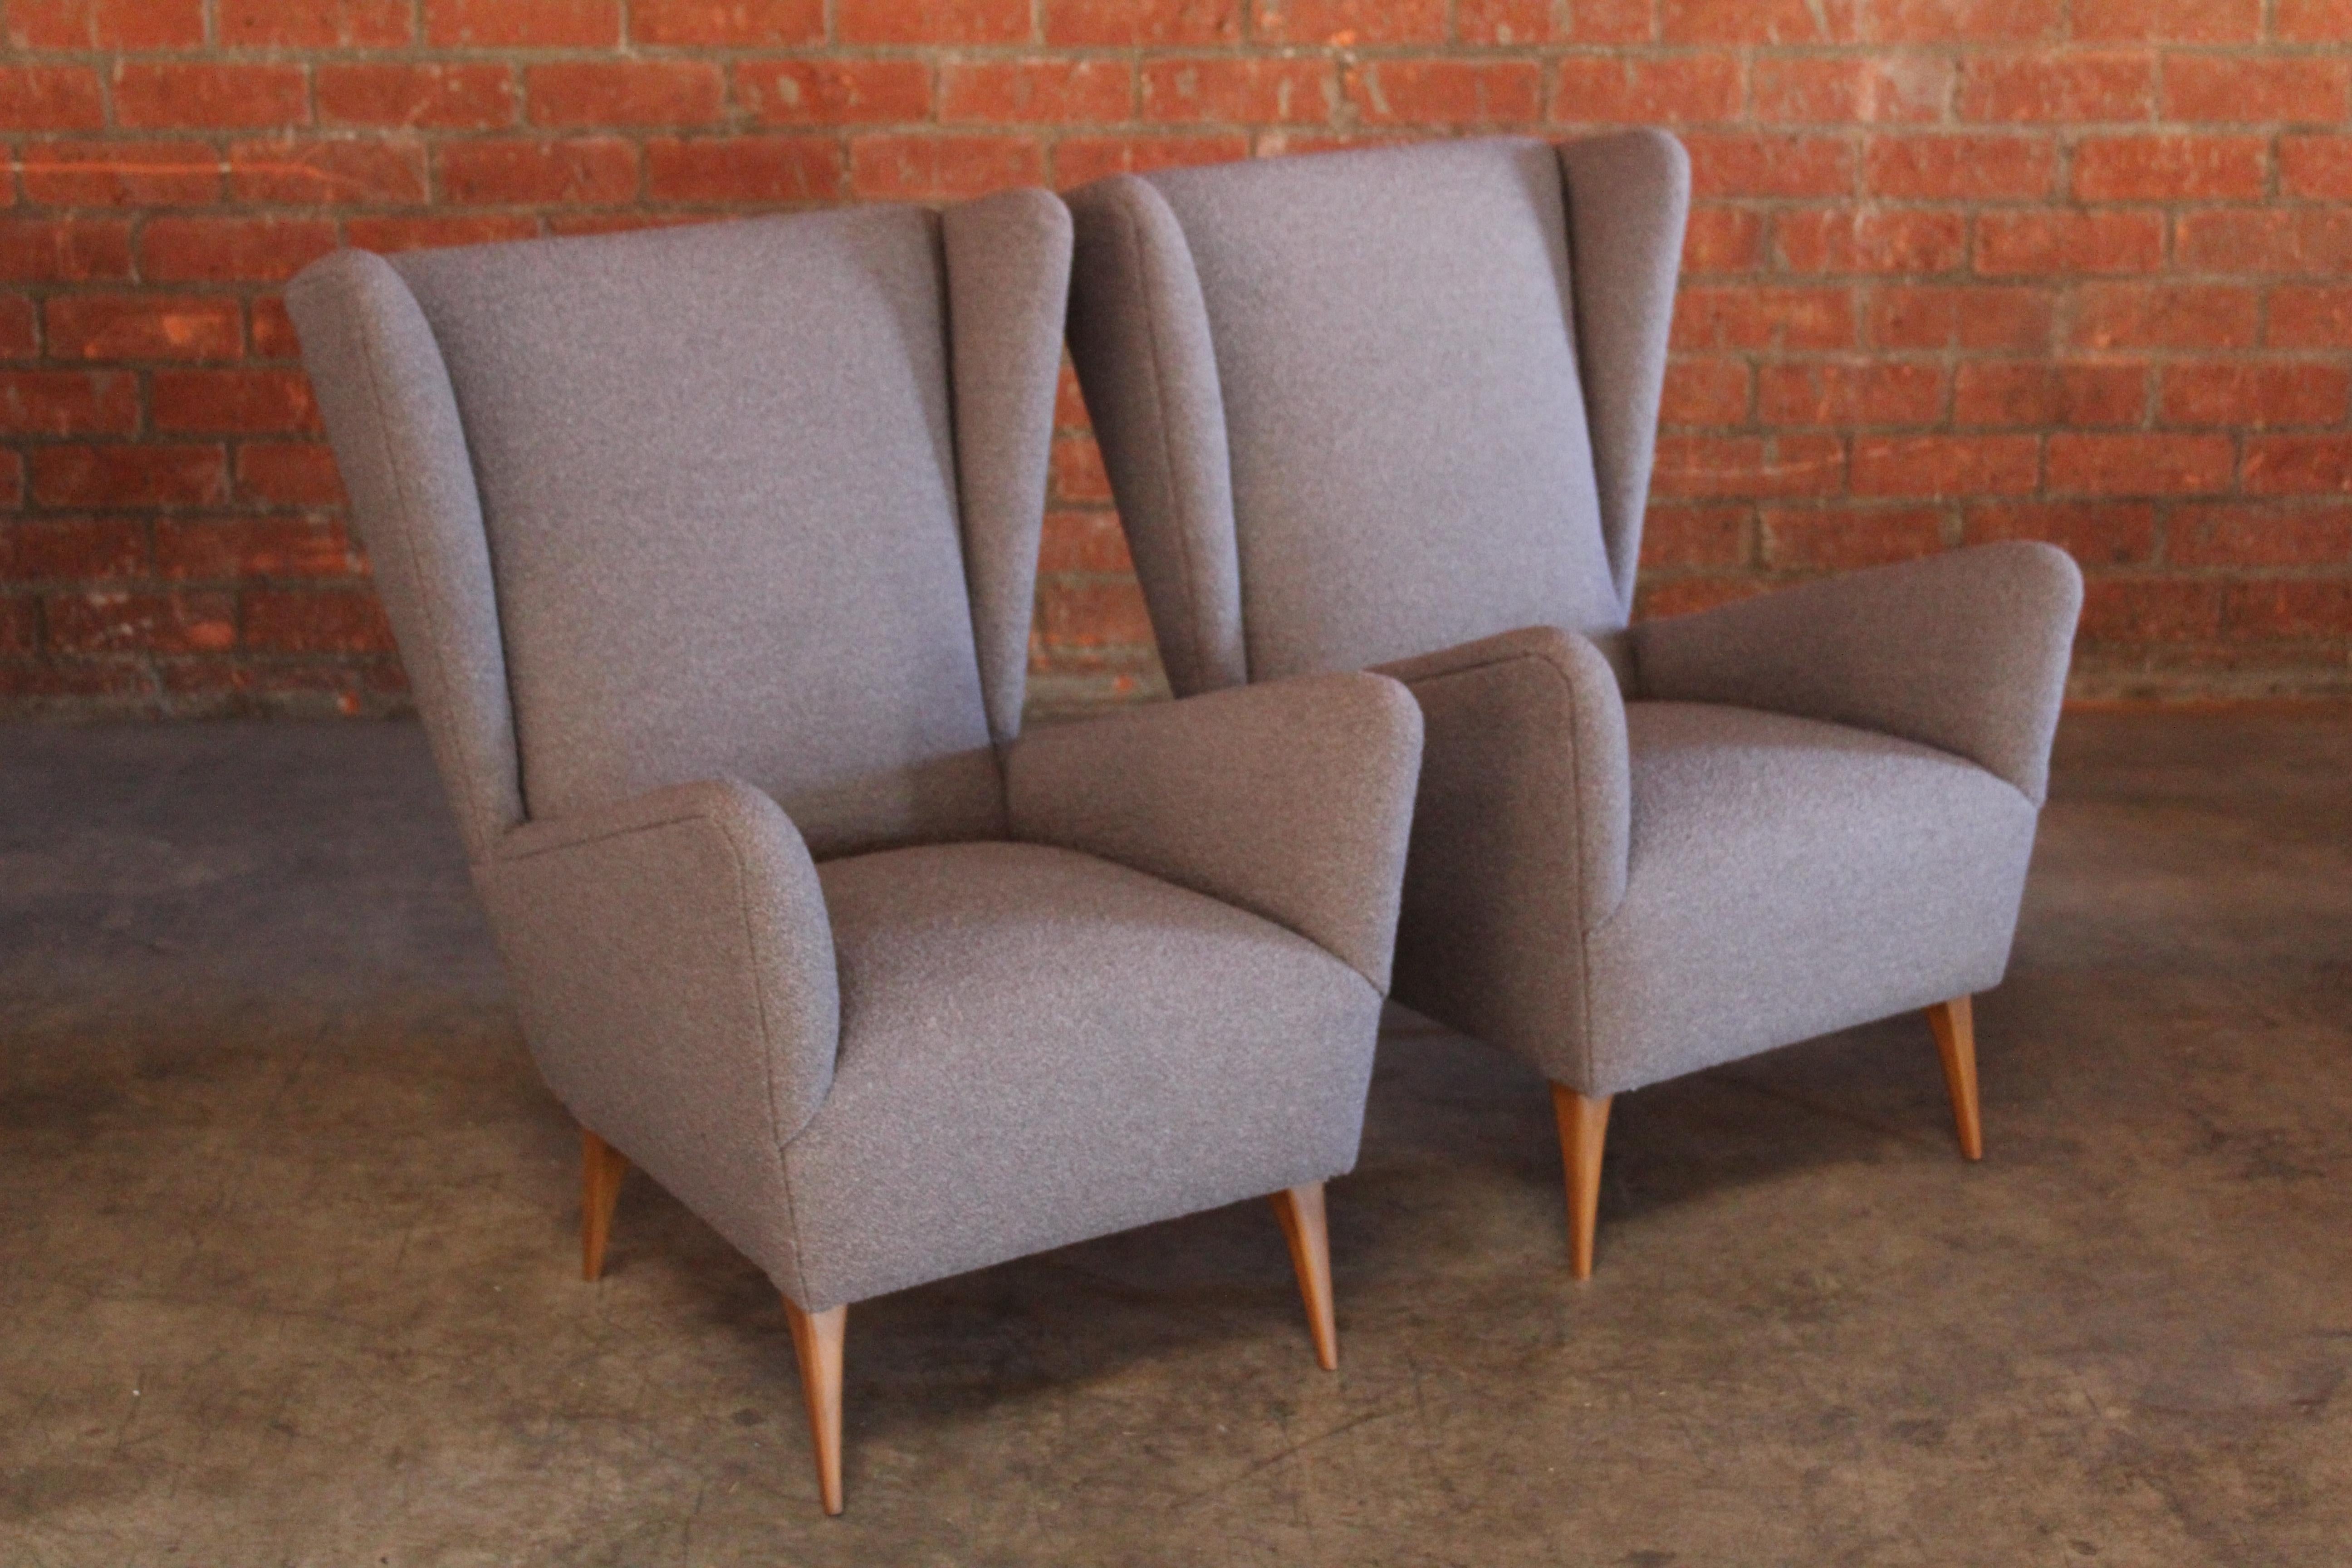 Pair of vintage 1950s highback Italian lounge chairs. The pair have been restored and reupholstered in a wool blend Italian made grey bouclé. The legs are solid walnut and have been refinished. In overall excellent condition. Sold together as a pair.